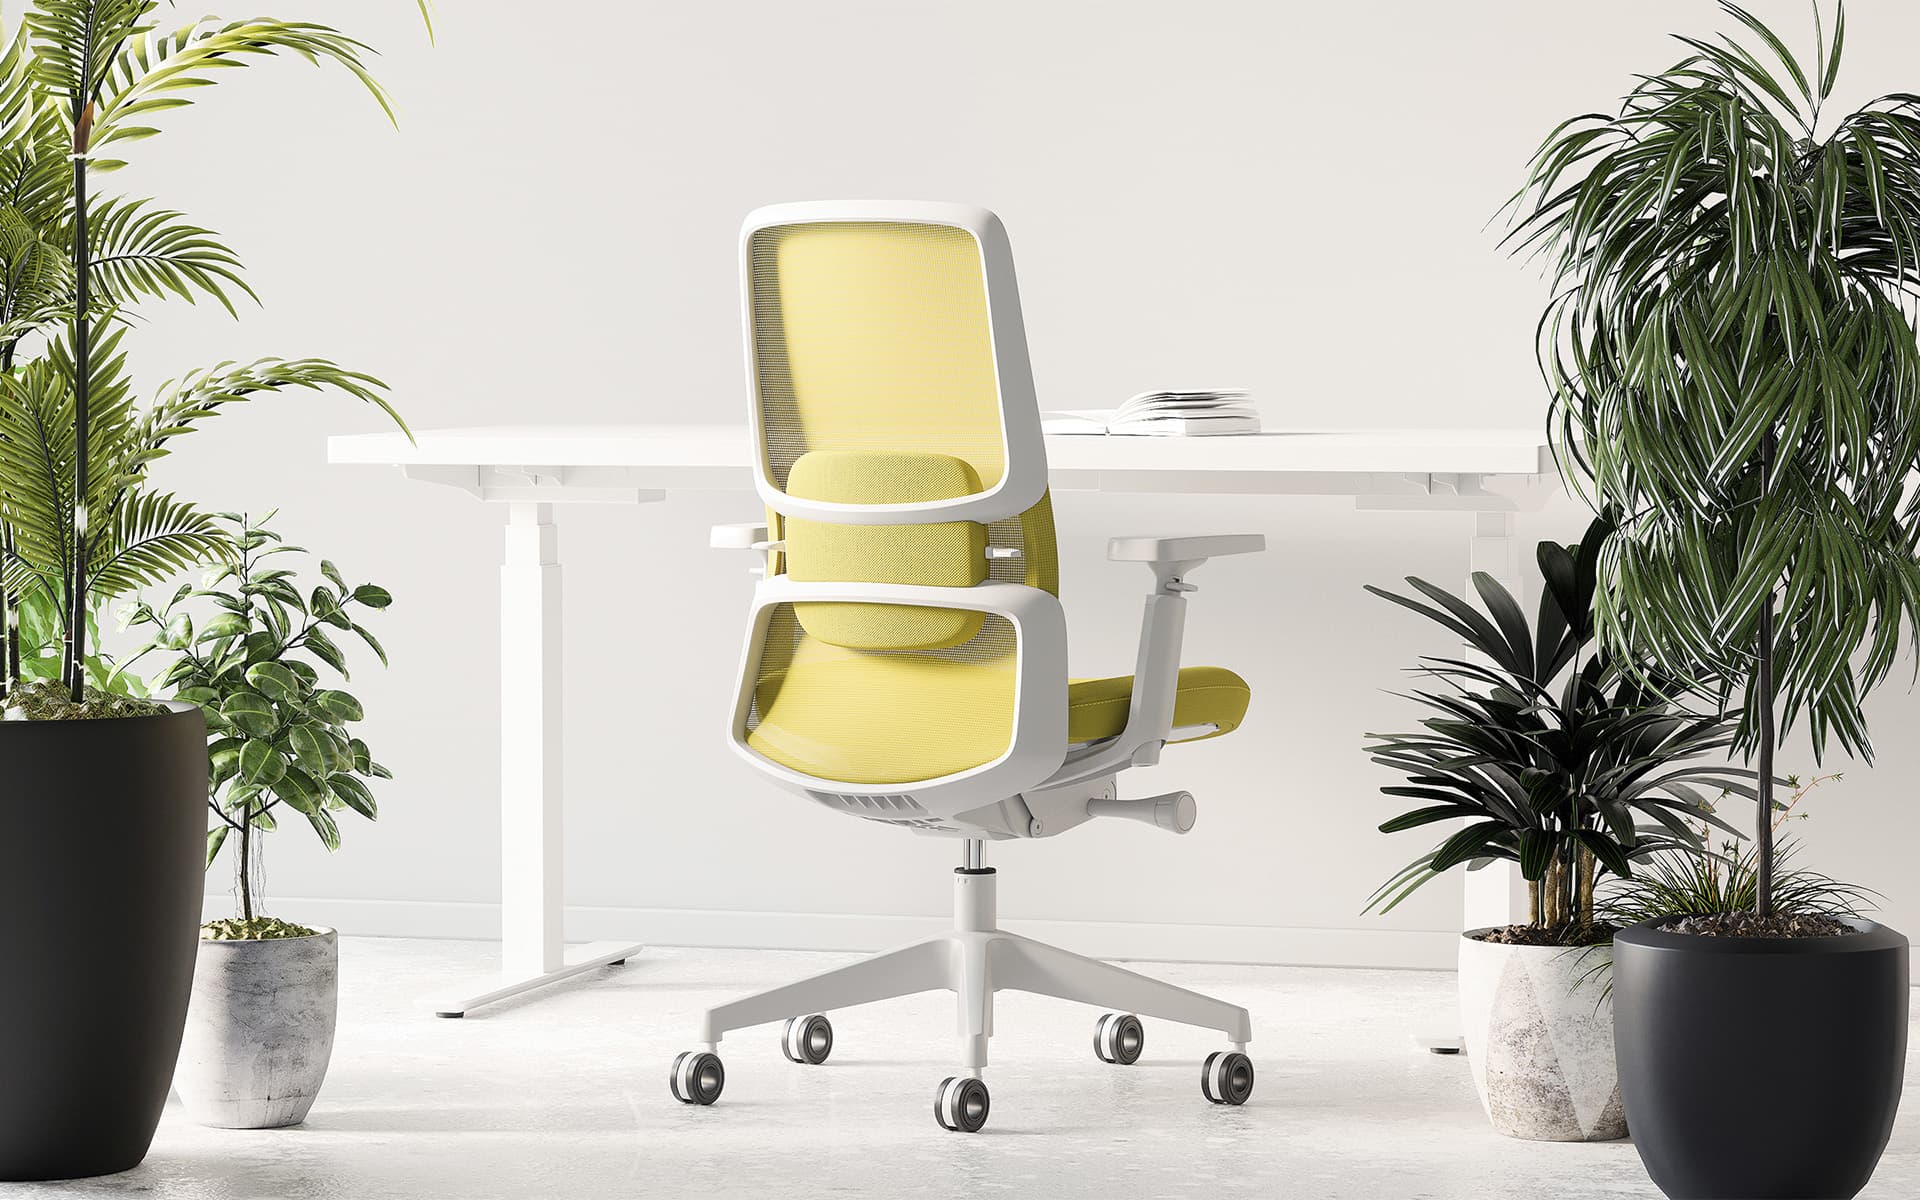 Minimalist workplace with a lemon yellow Henglin M2 office chair by ITO Design